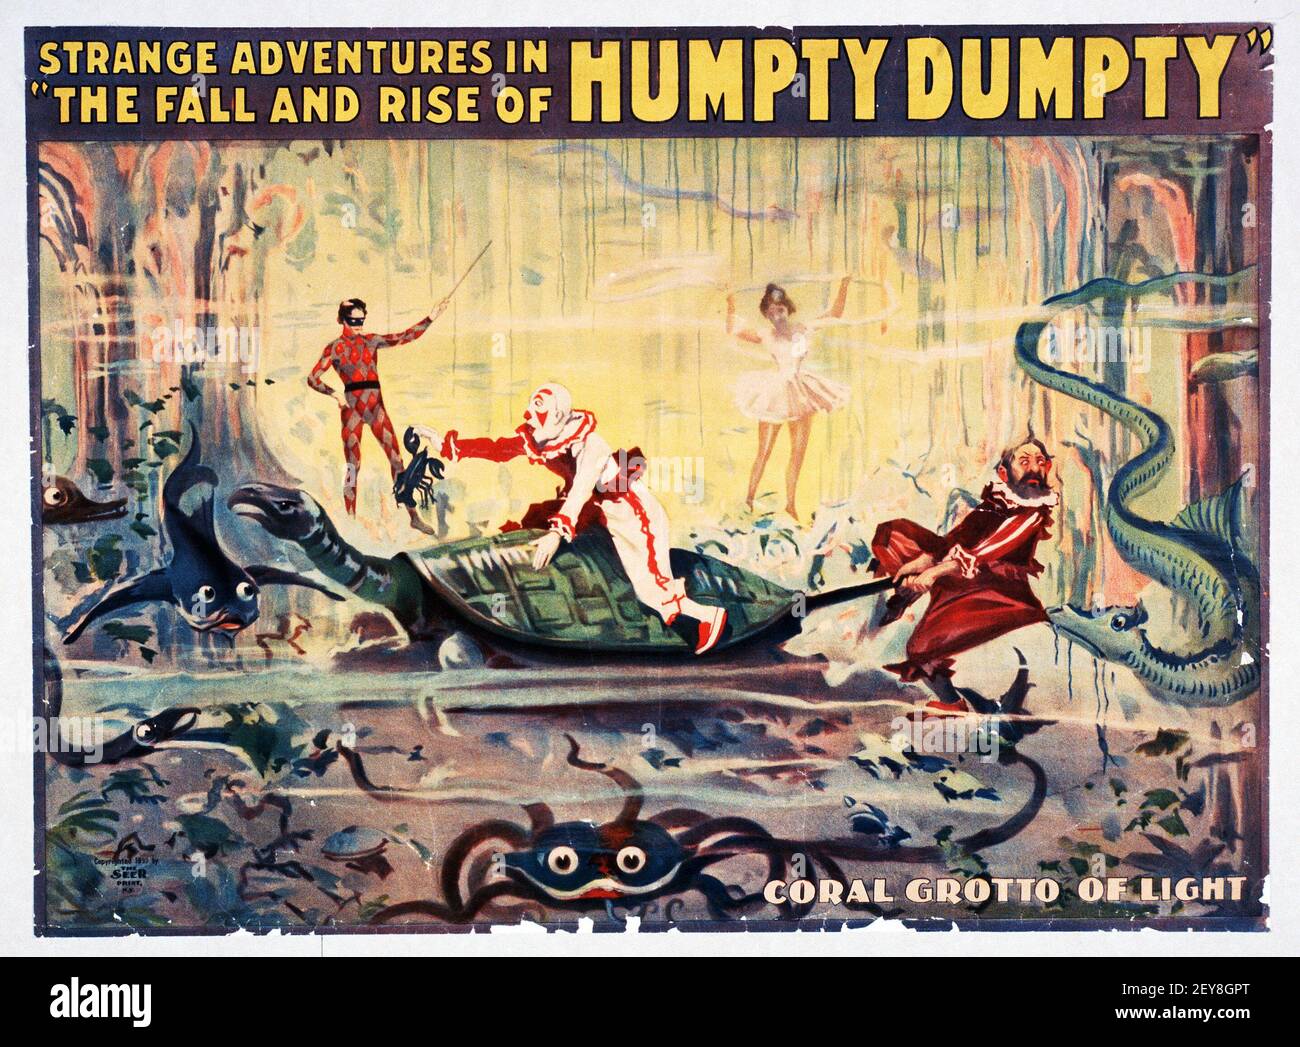 Strange Adventures in „The Fall and Rise of Humpty Dumpty“ – Classic Show Poster, Old- und Vintage-Stil. Korallengrotte des Lichtes. Stockfoto